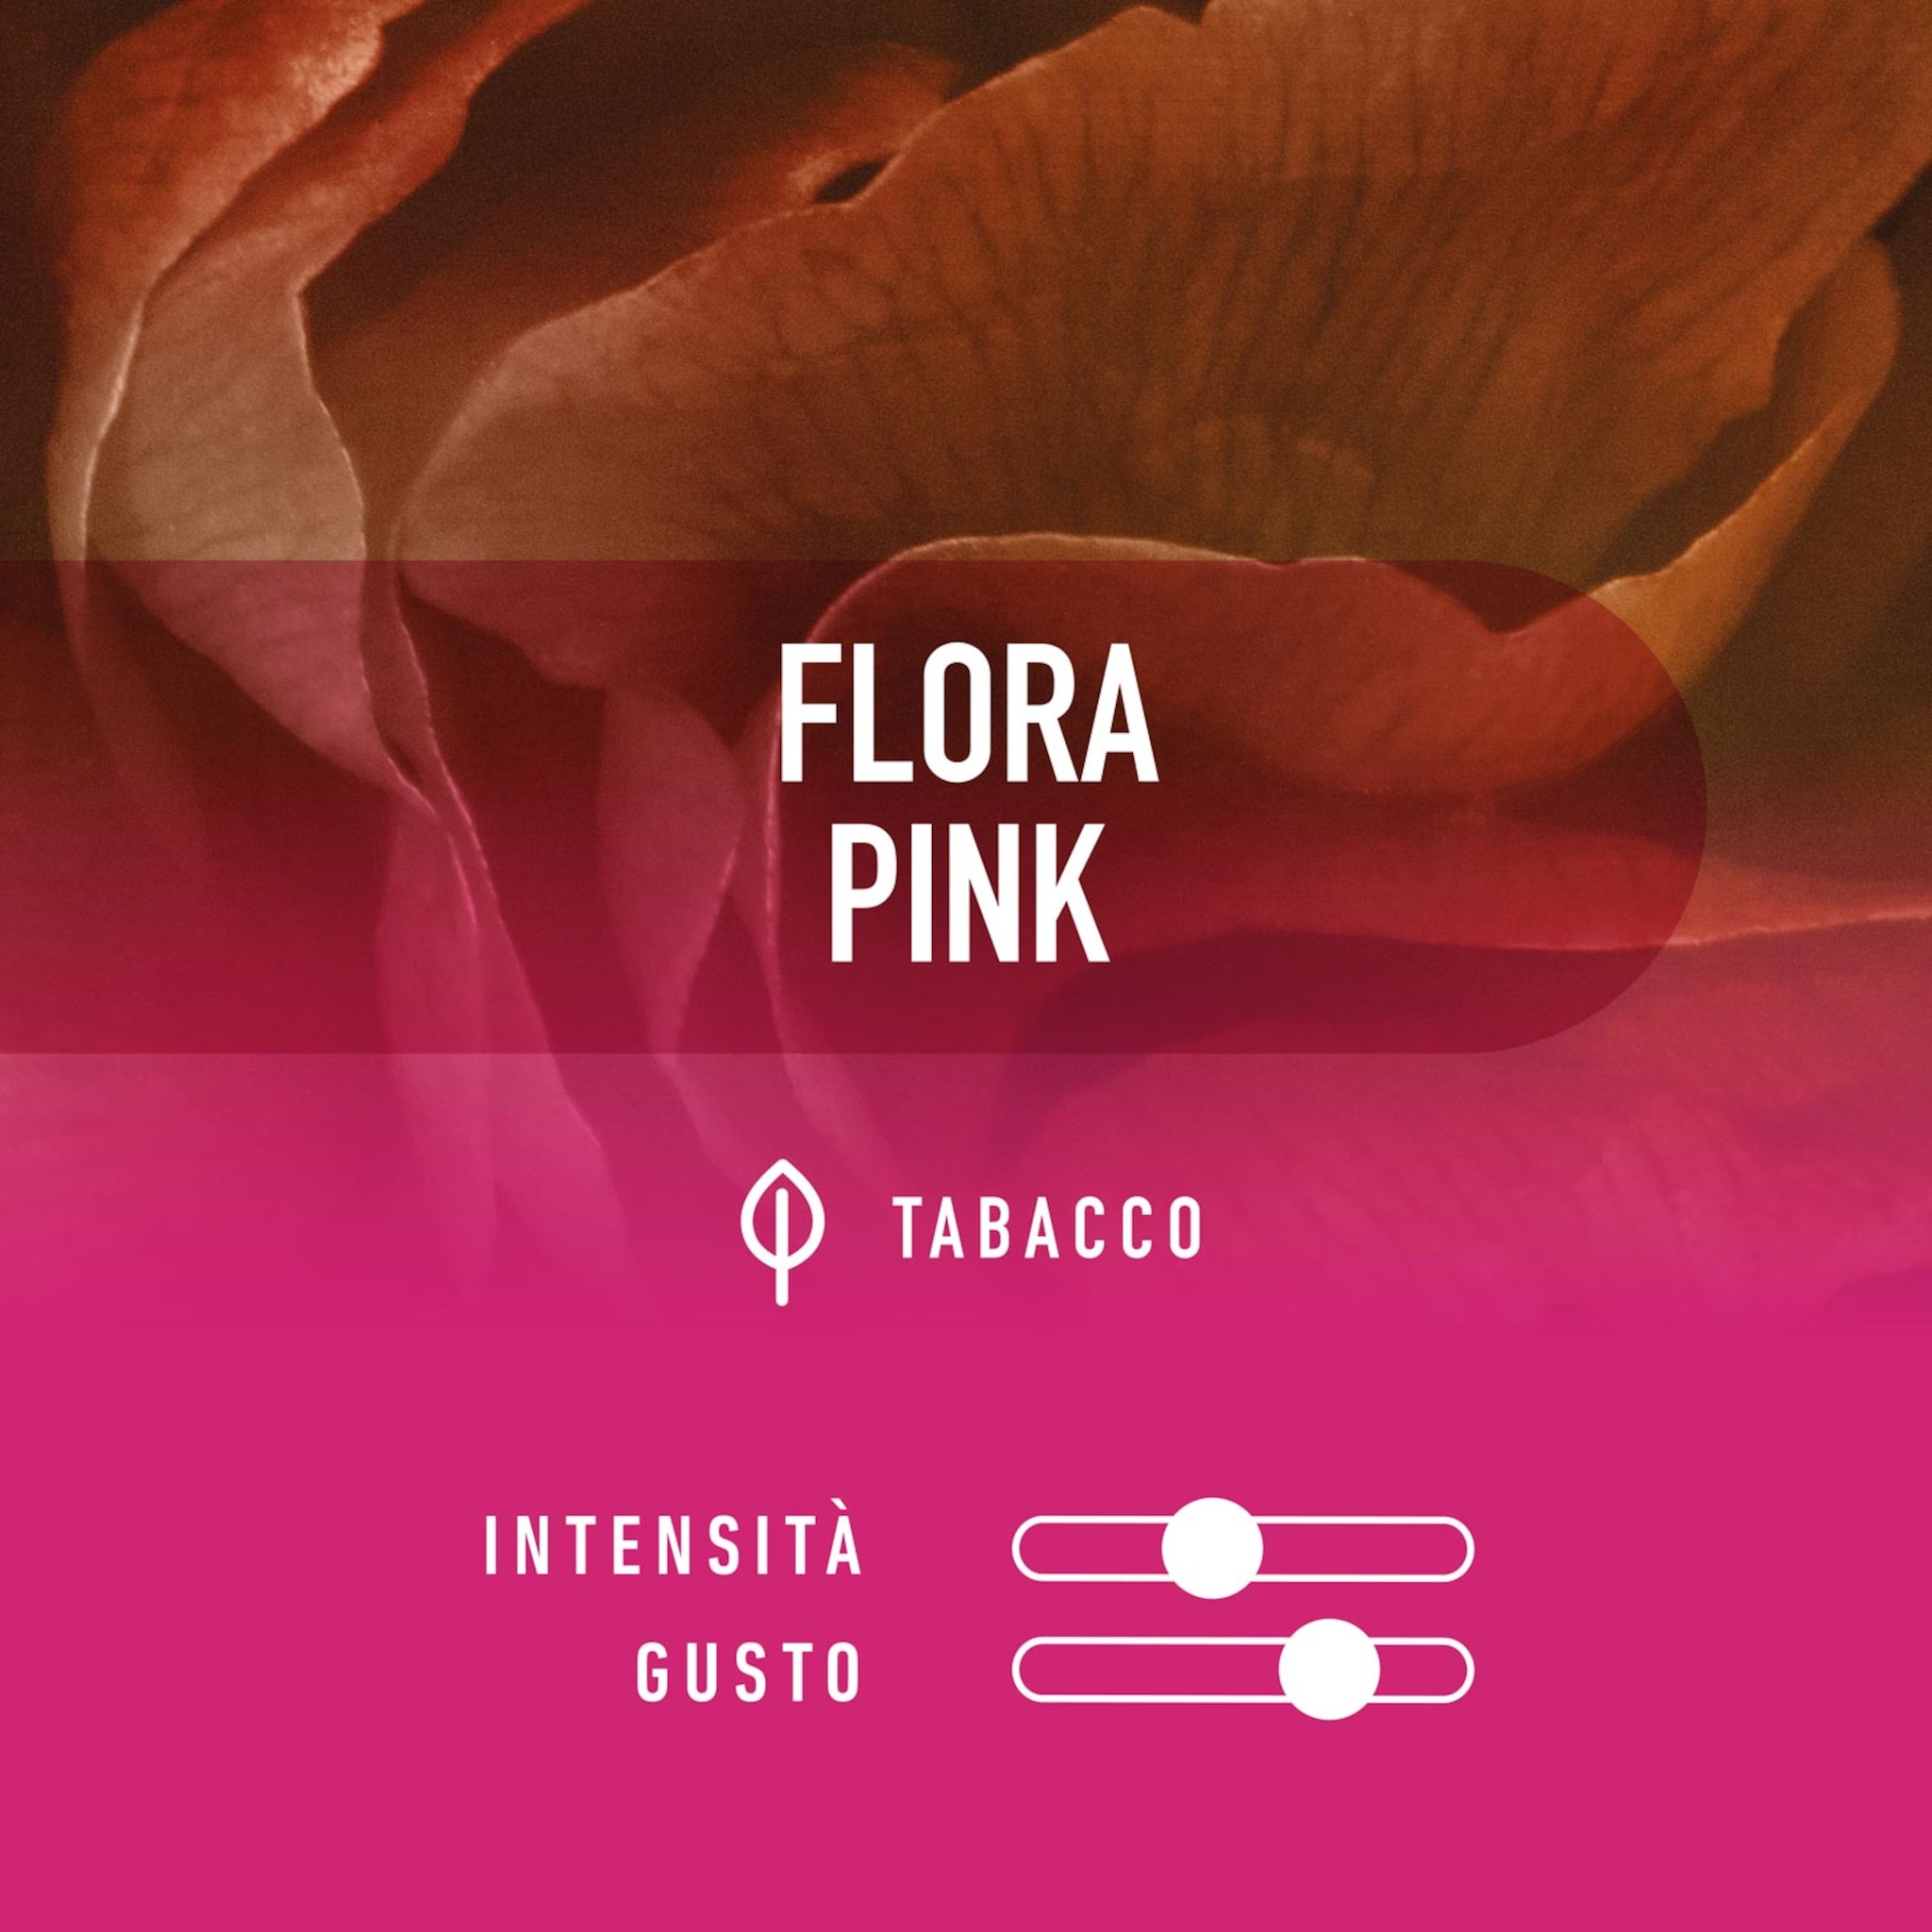 PULZE ID FLAVOUR FloraPink - Tabacco scaldato 